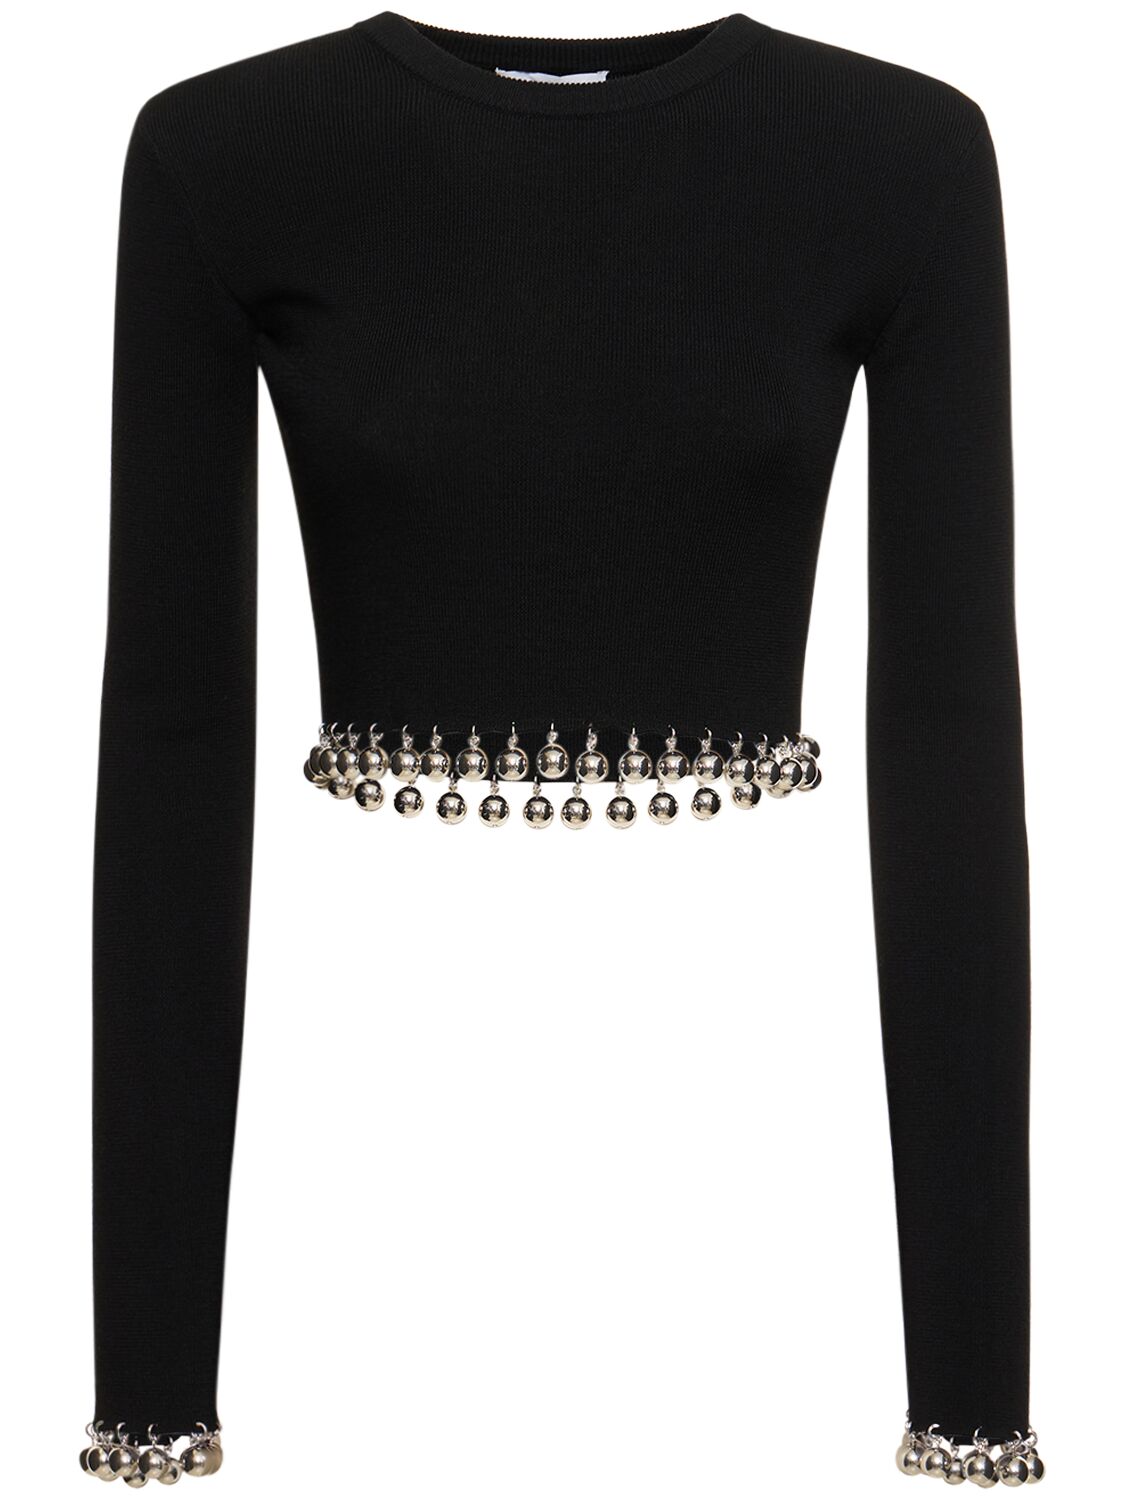 Image of Embellished Wool L/s Crop Sweater